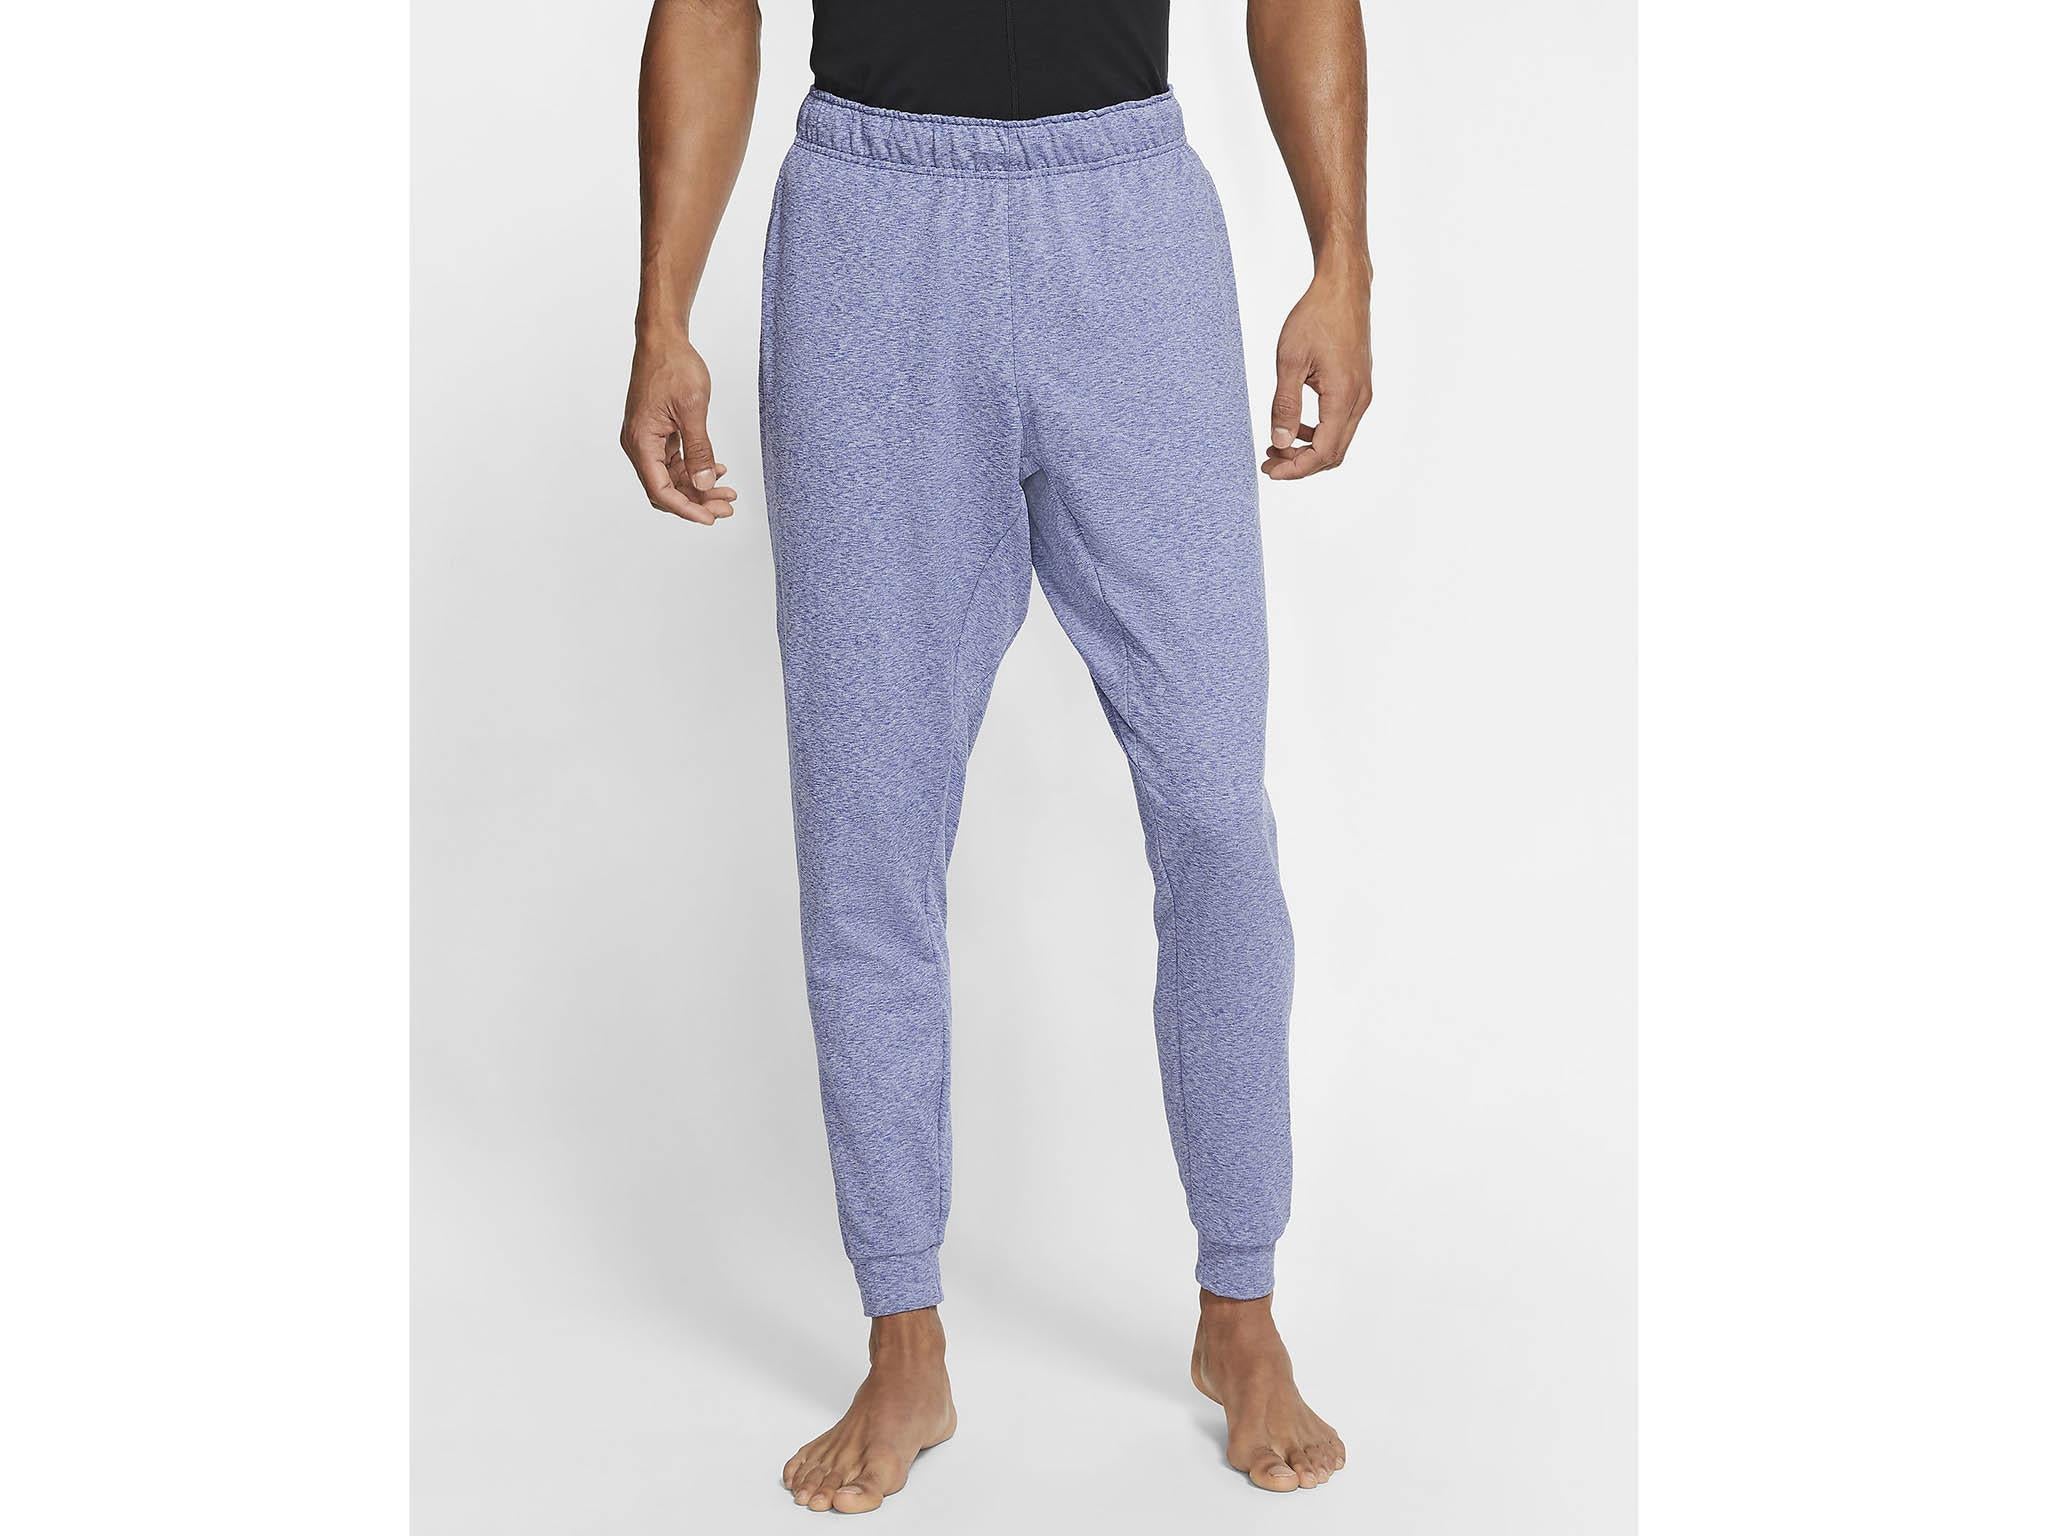 mens yoga outfit